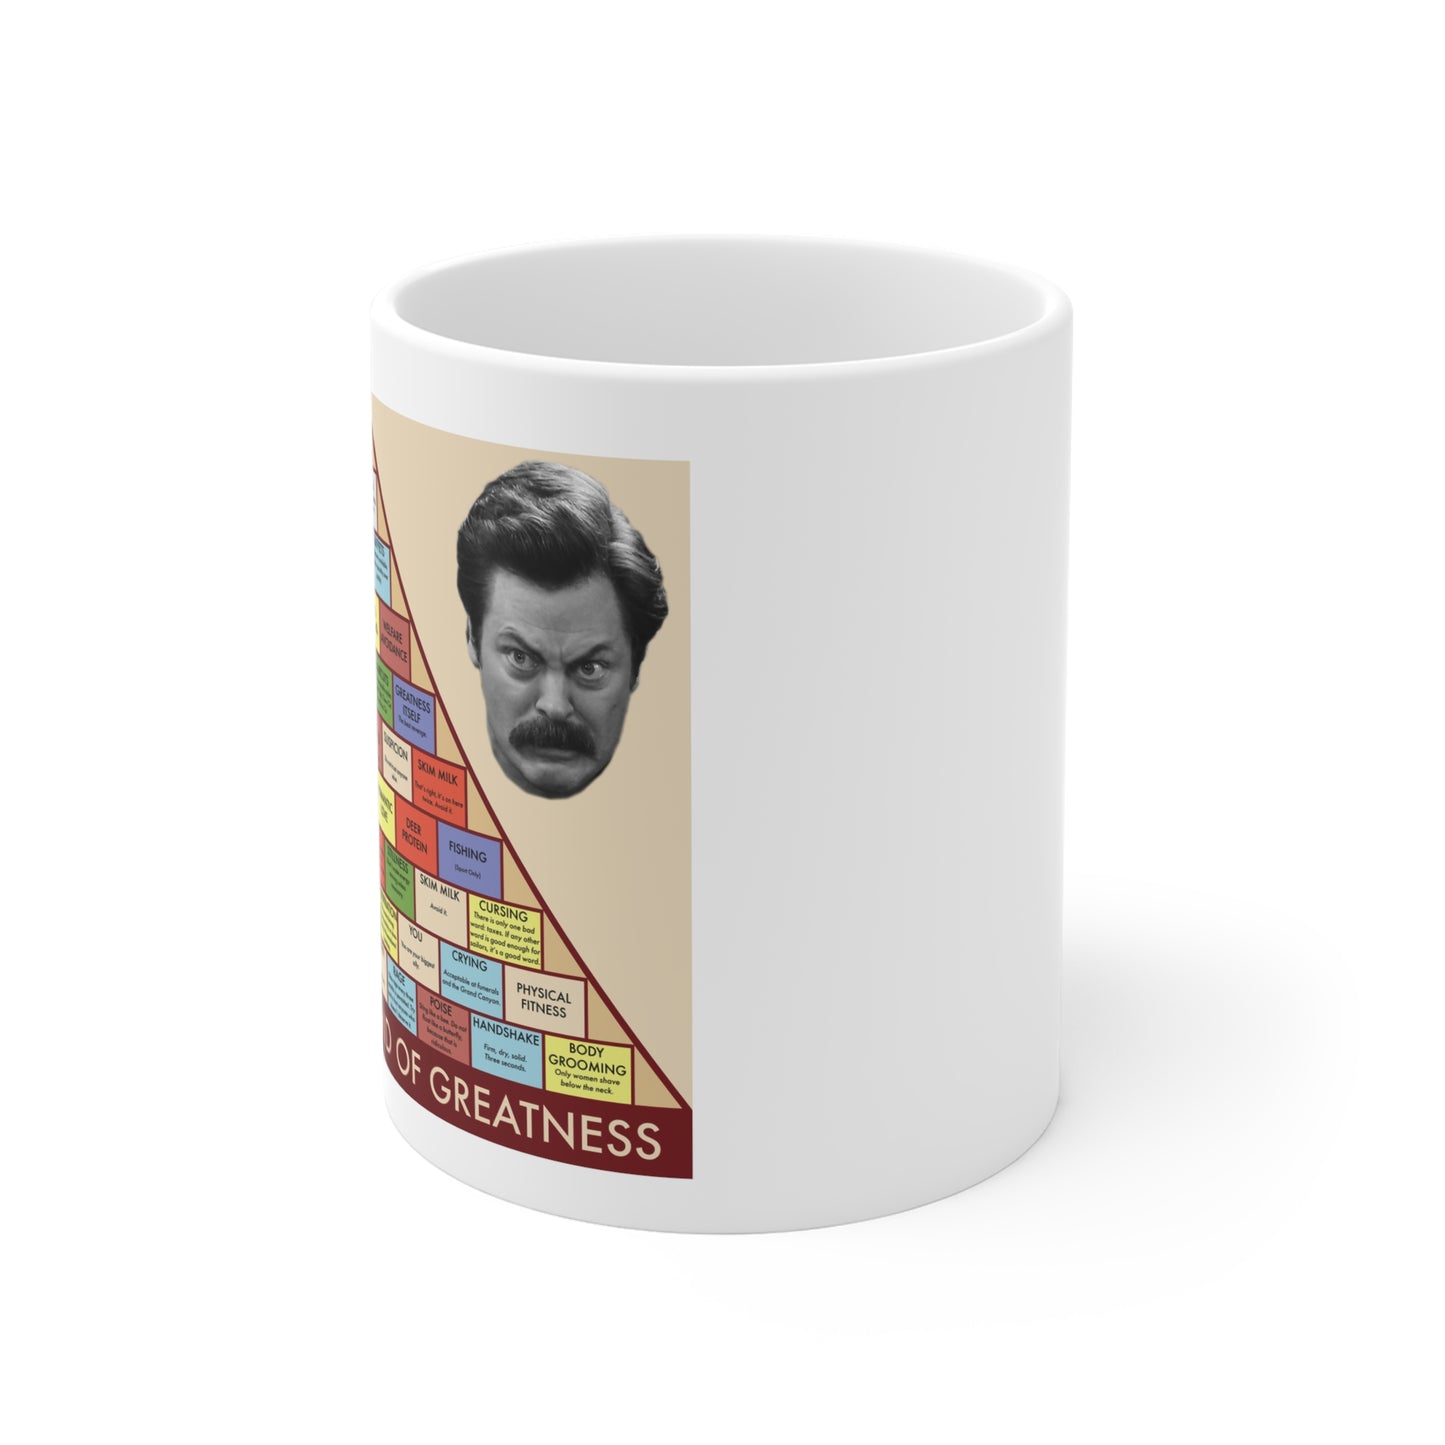 Ron Swanson Pyramid of Greatness mug (11 oz) - Parks and Recreation show fan gift